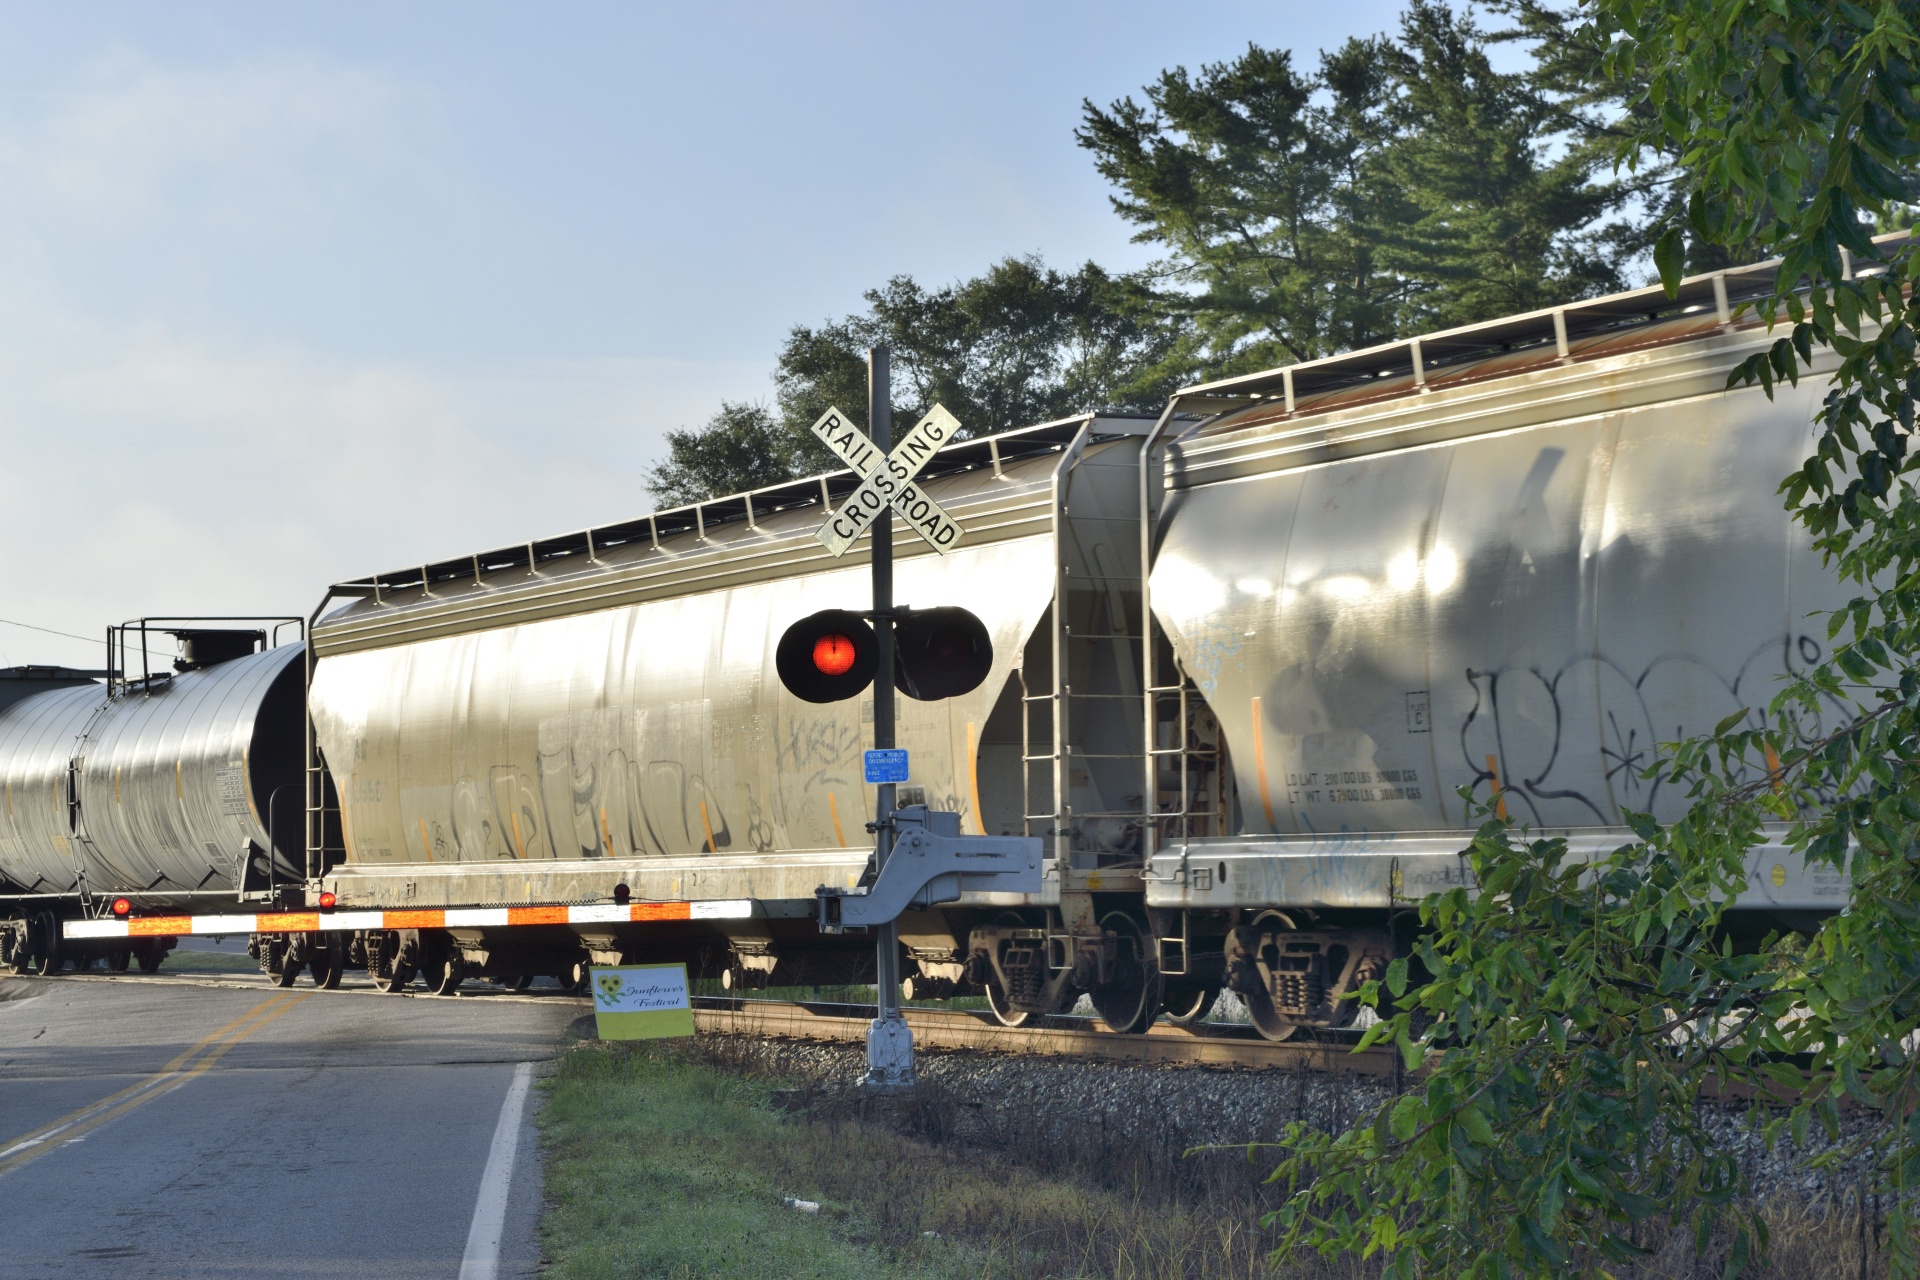 Over 1,000 Train Derailments Occur Every Year in the U.S.